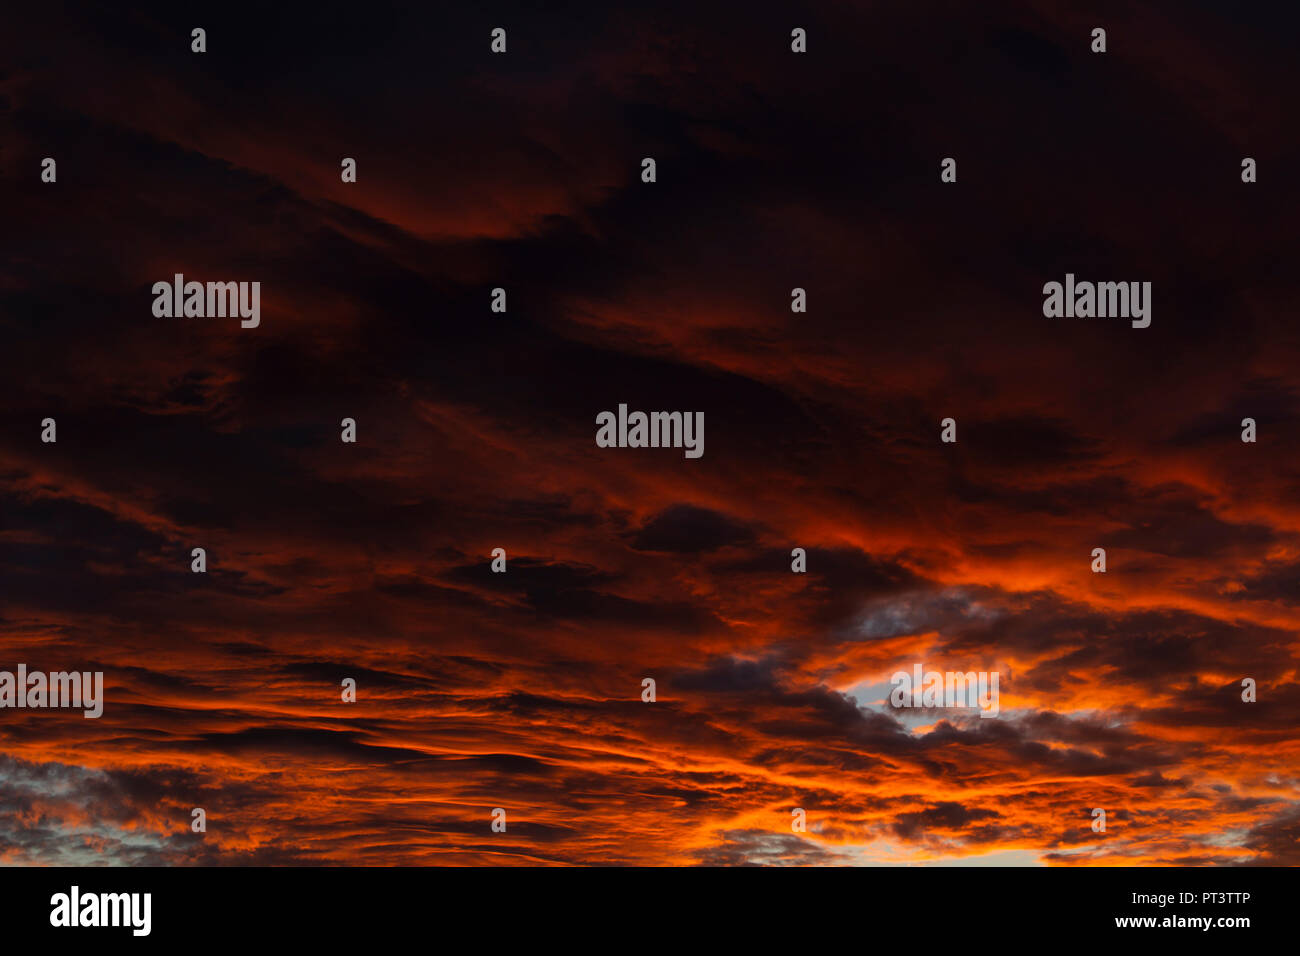 Clouds lit orange by sunset. Gradient from darker to brighter. Stock Photo